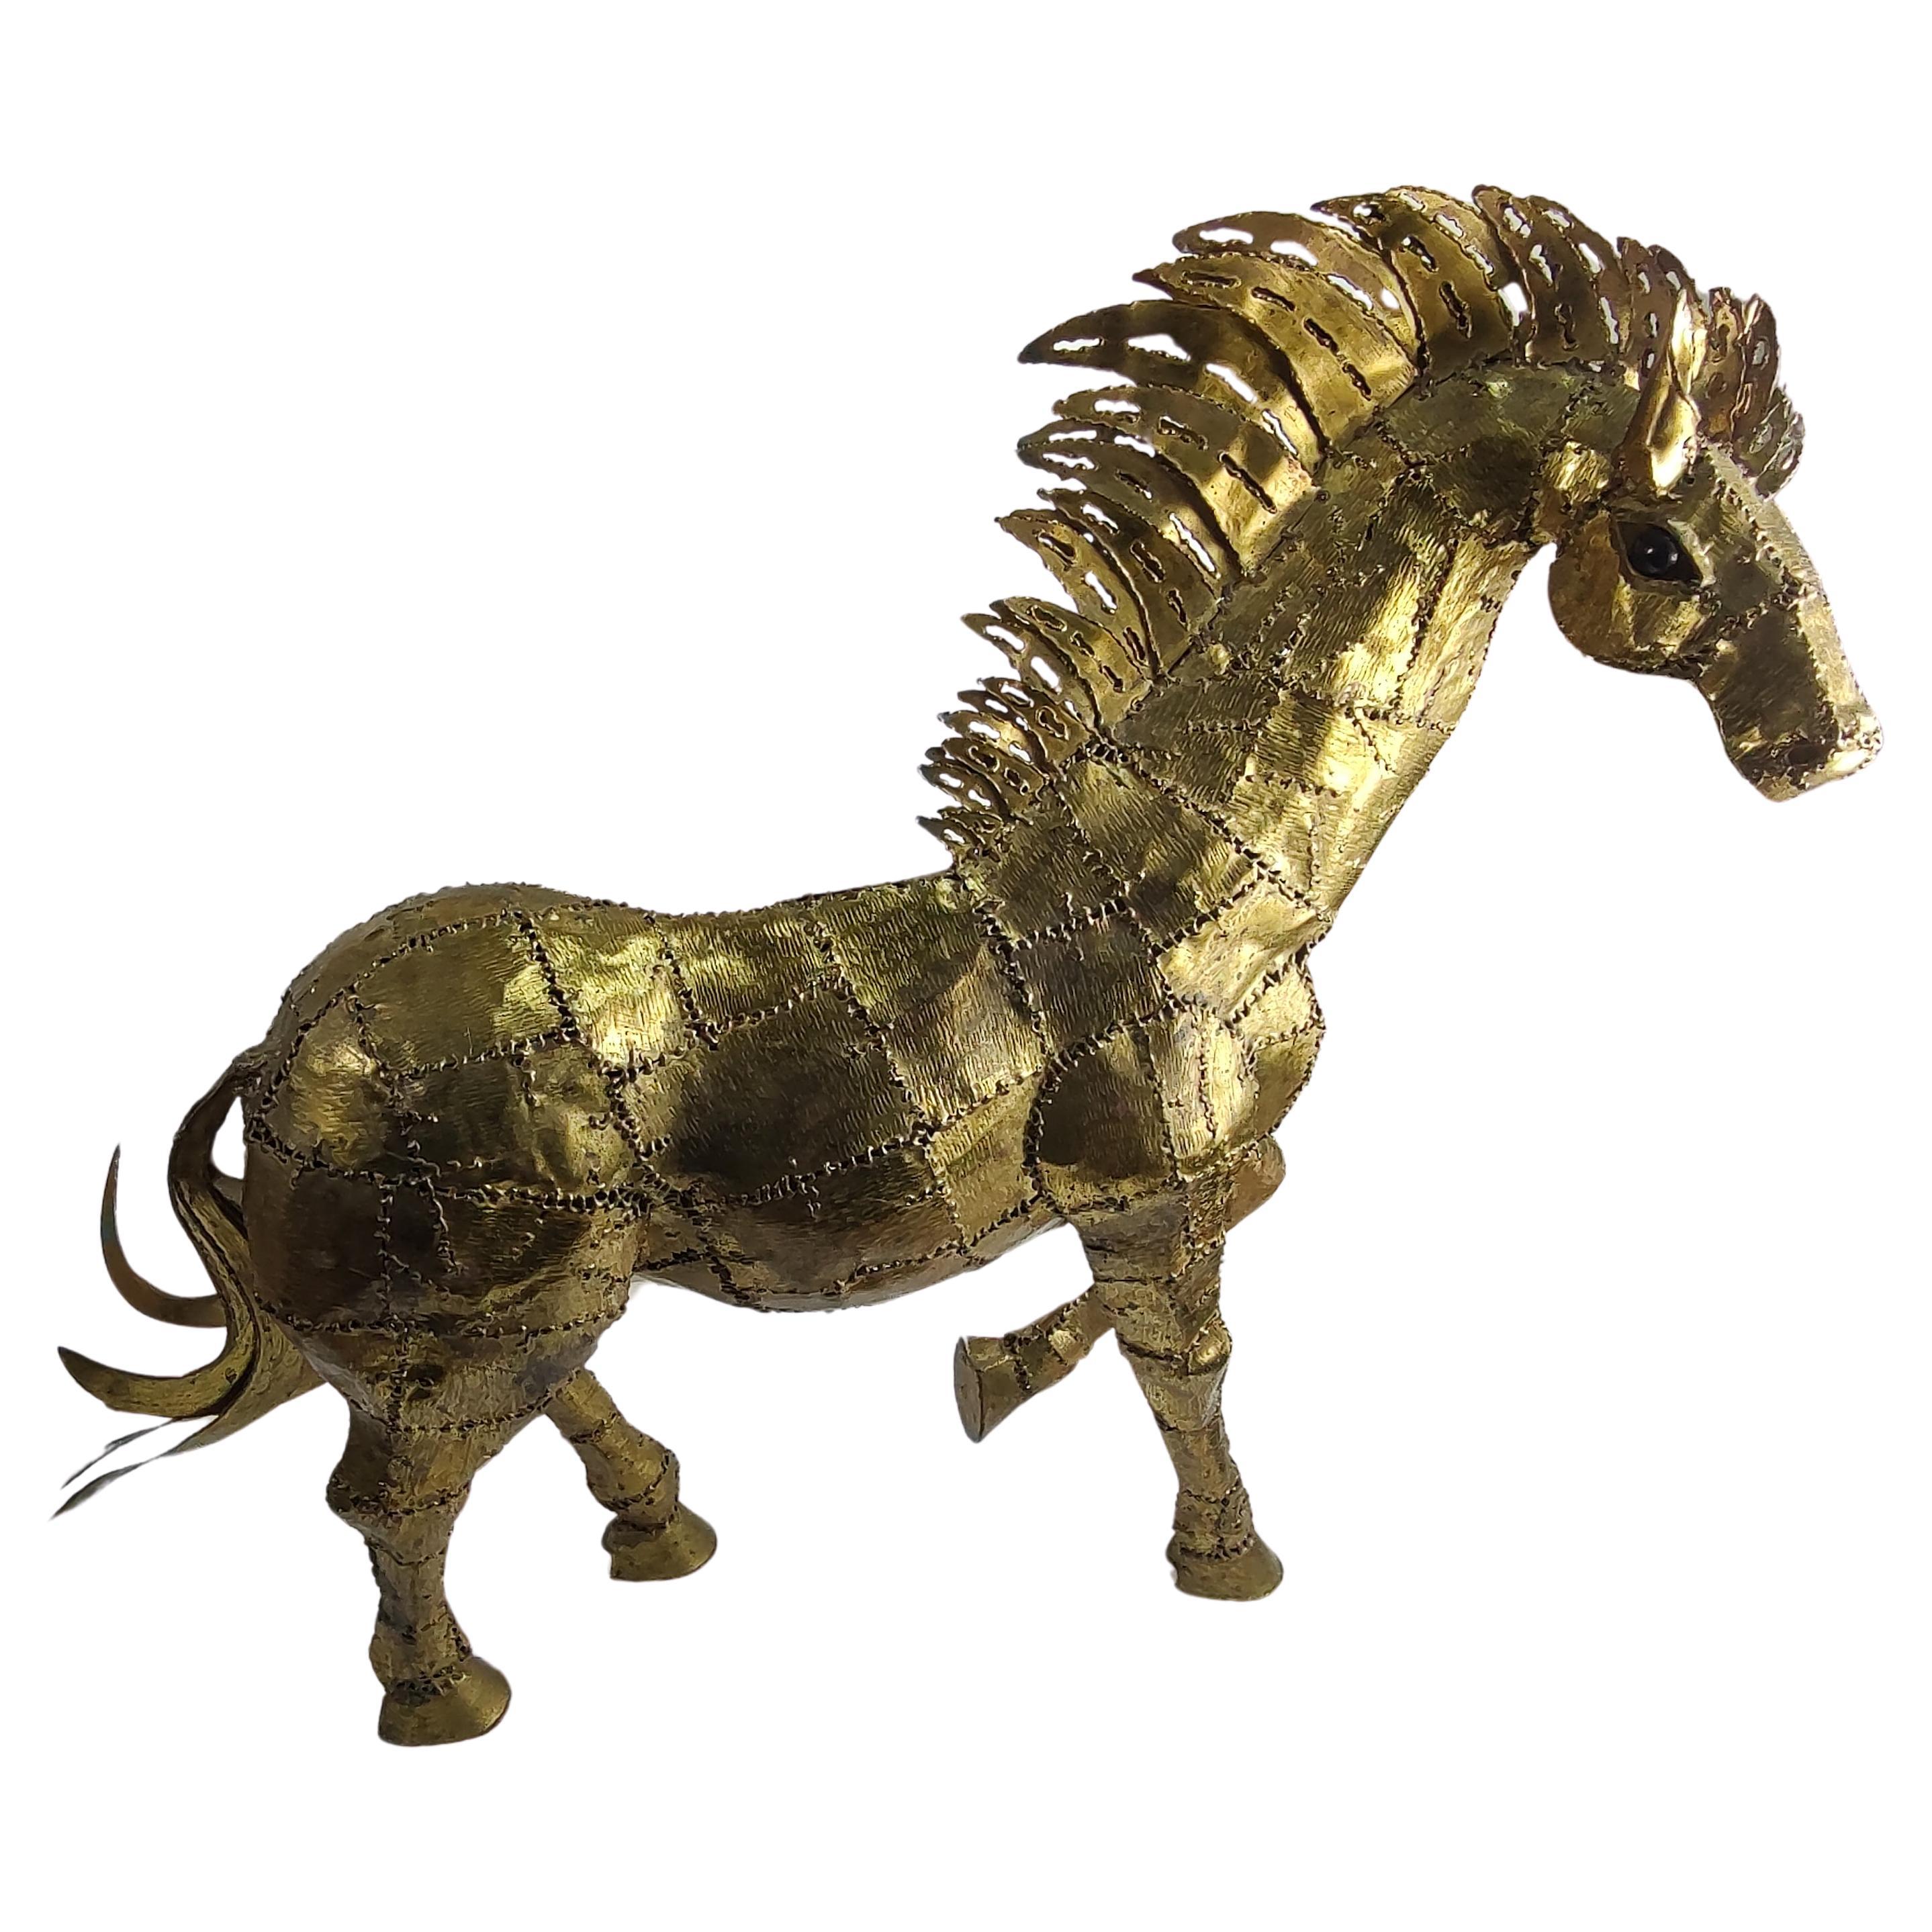 Large Mid Century Modern Sculptural Brass Horse by Luciano Bustamante 1965 In Good Condition For Sale In Port Jervis, NY